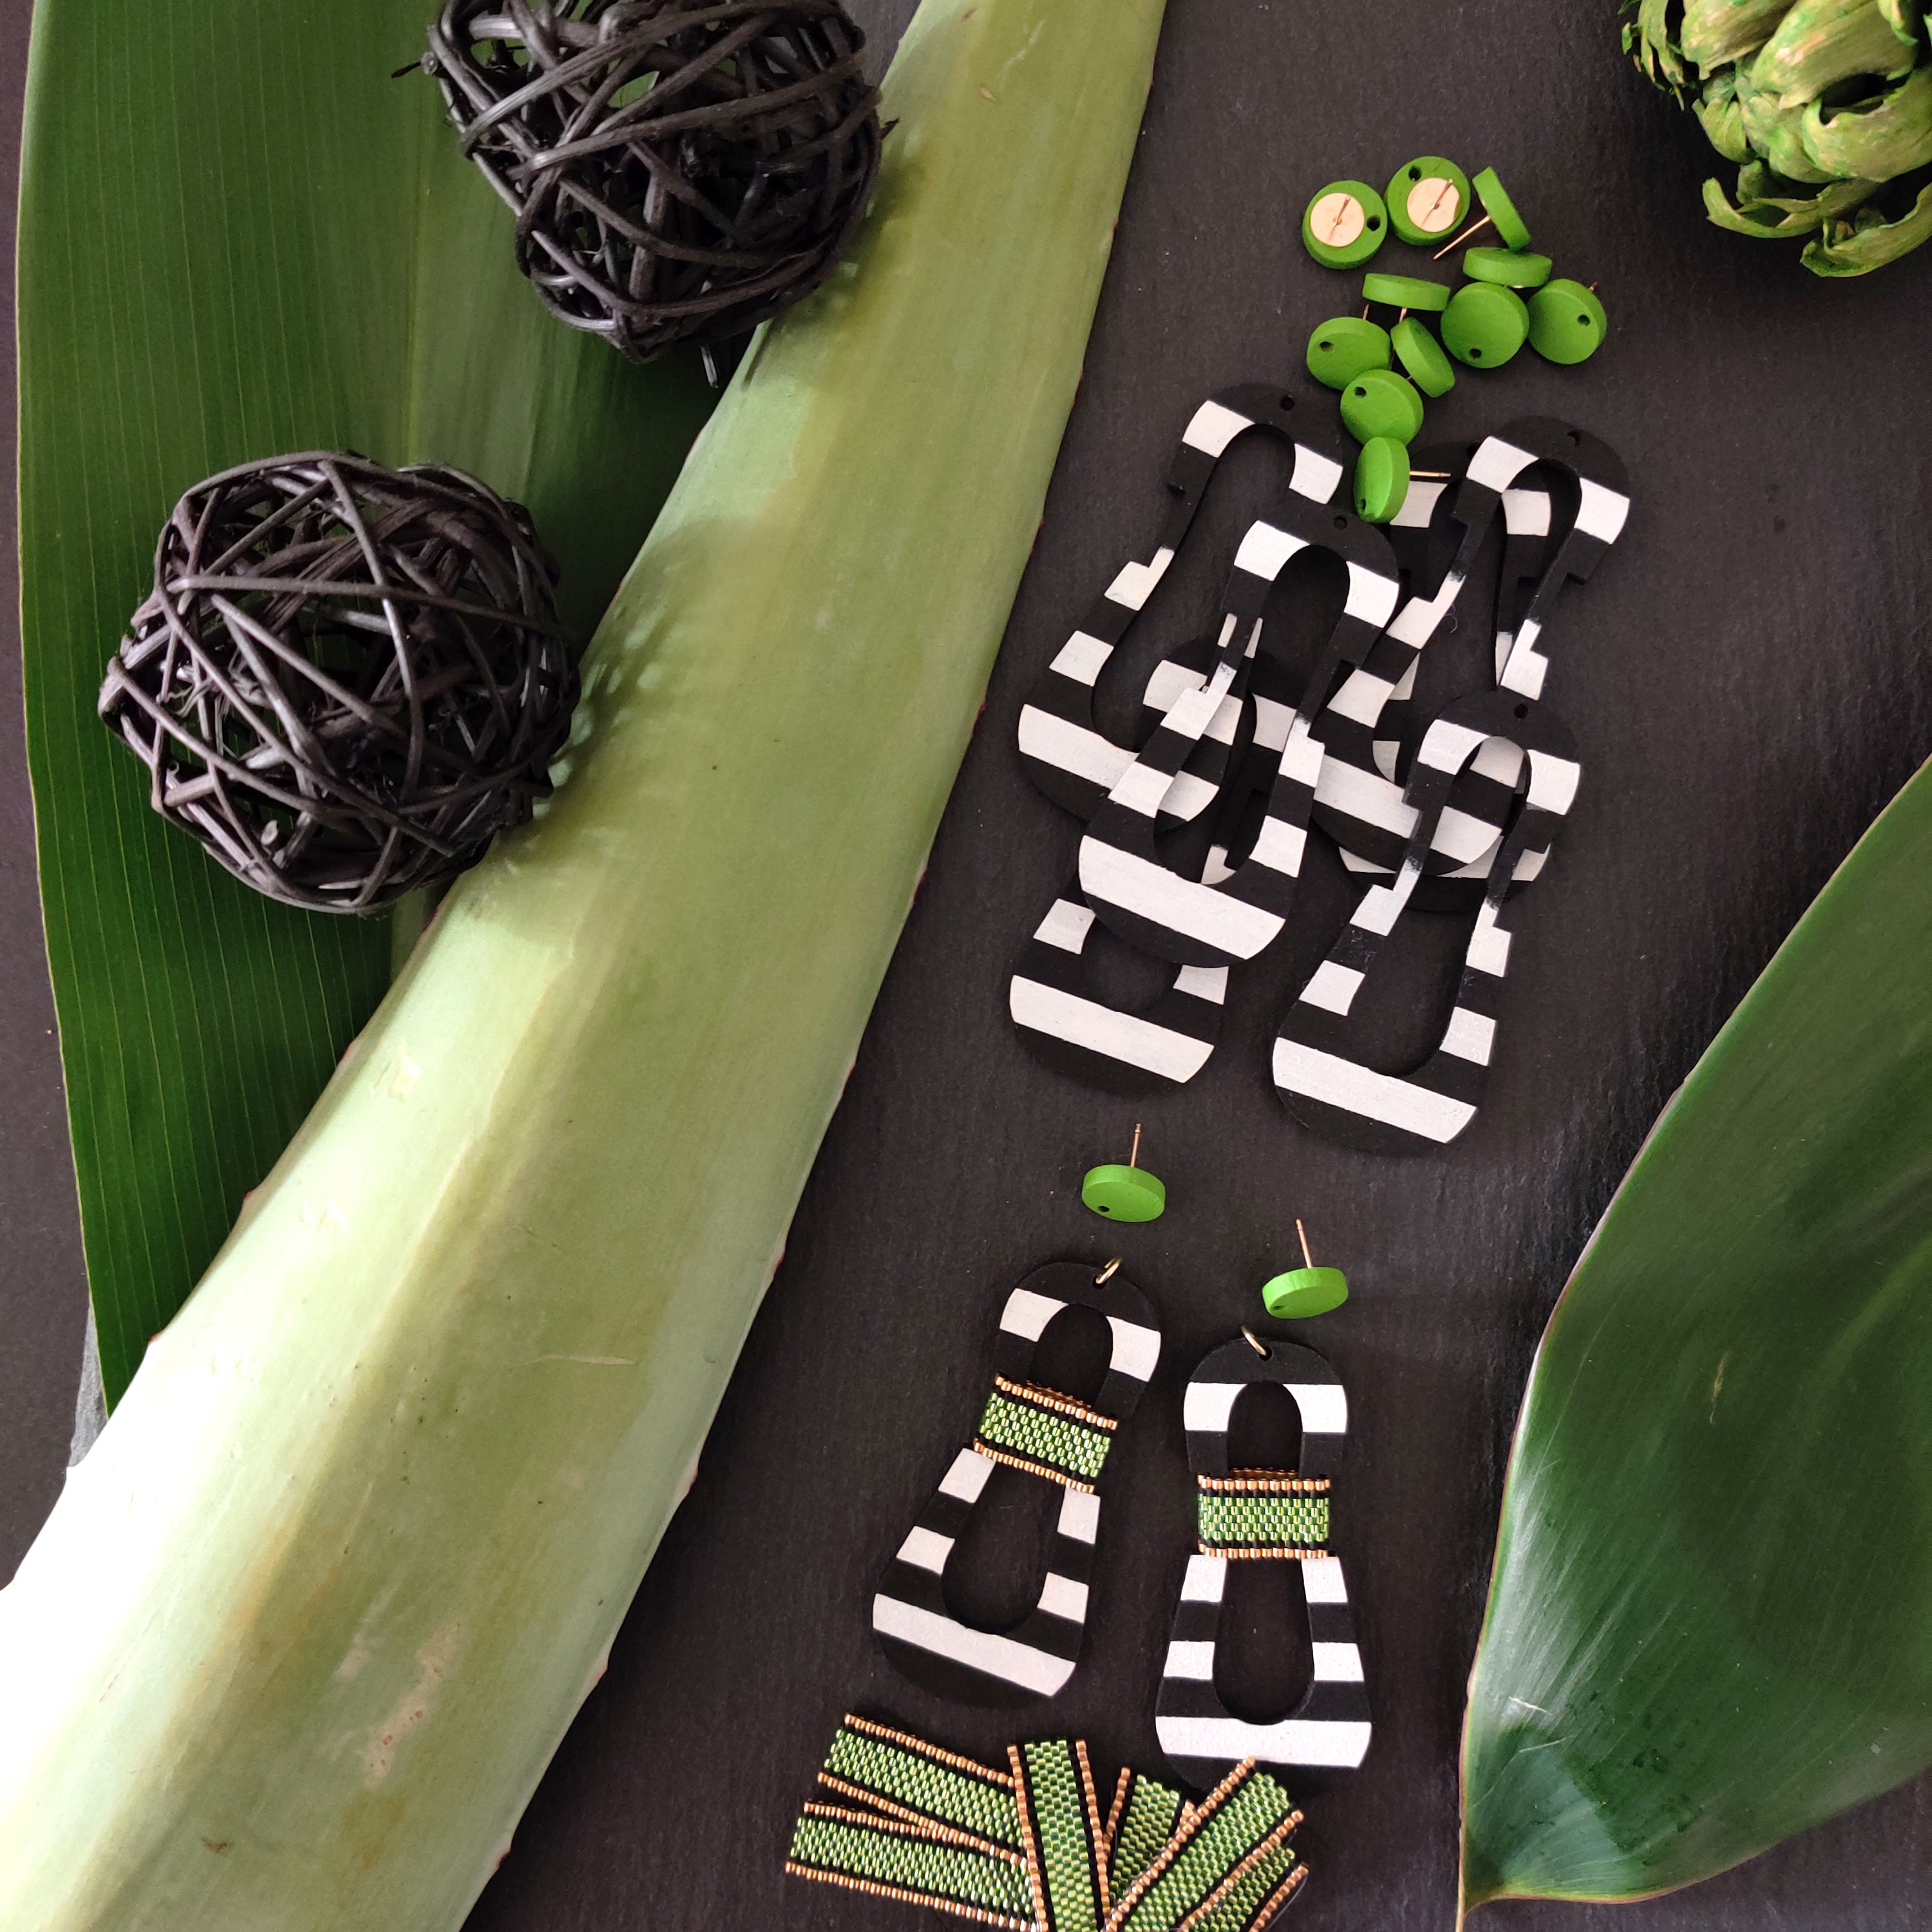 Handcrafted modern, curvy, black and white striped statement earrings with hand-beaded chartreuse accents by the brand SCOTCHBONNET.